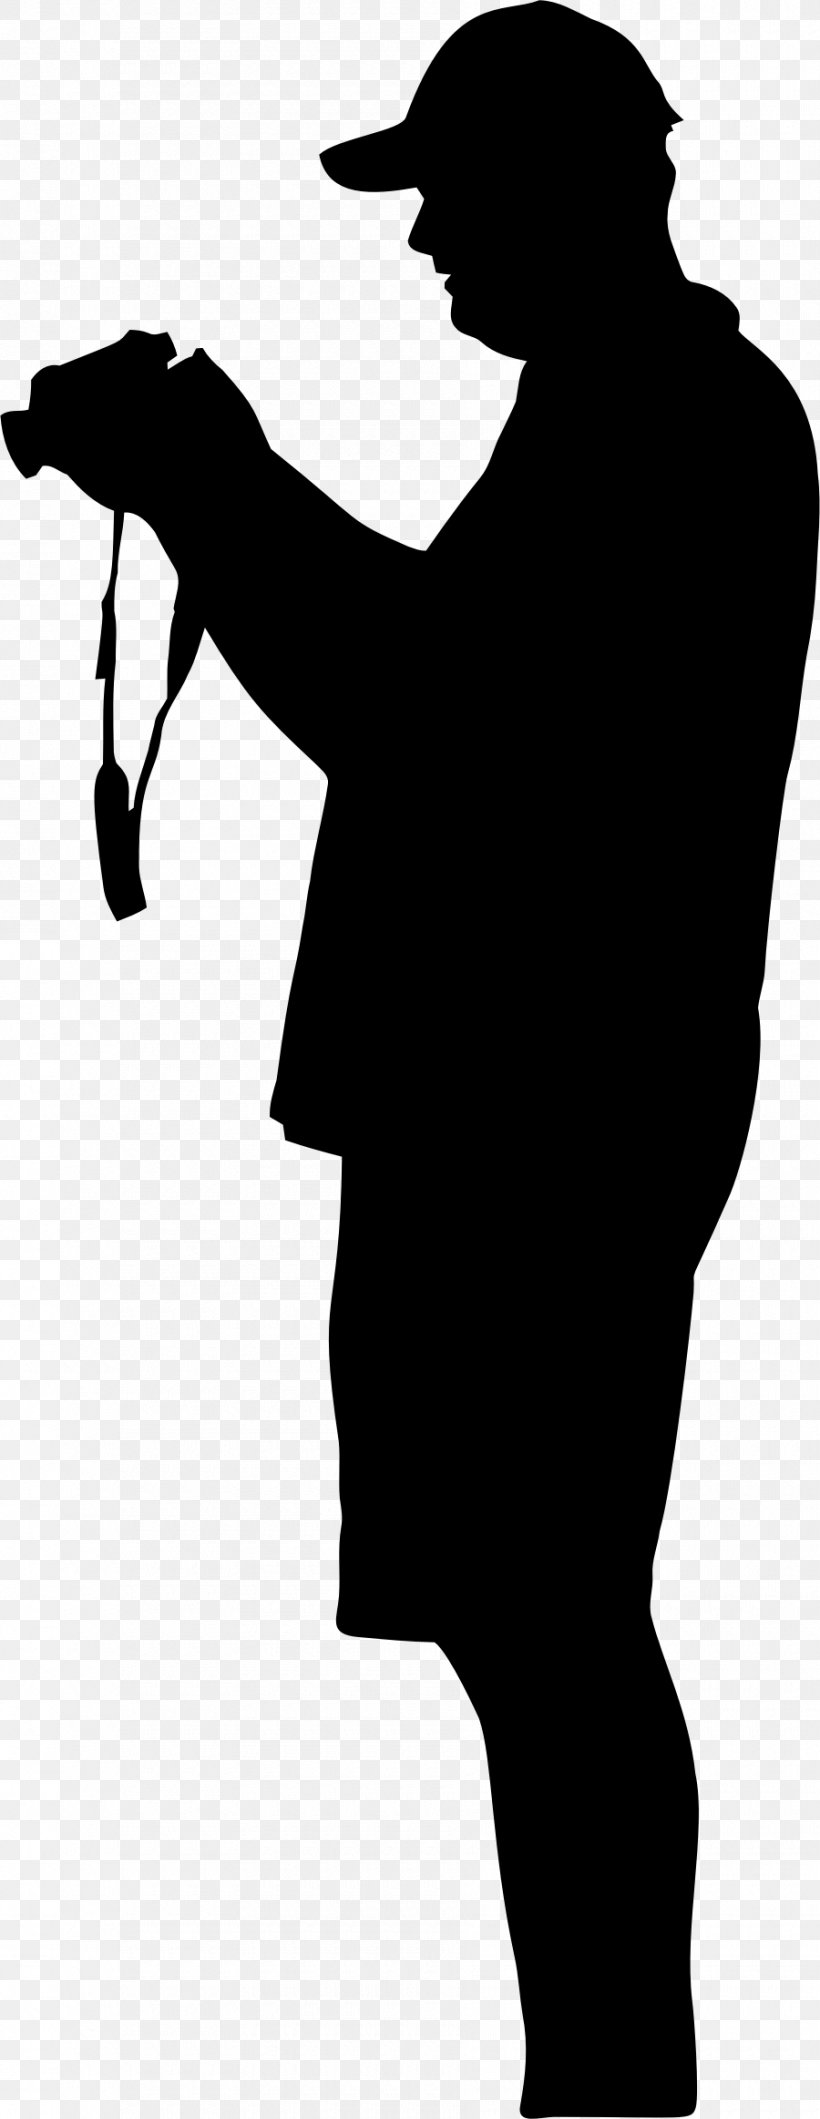 Silhouette Black And White Clip Art, PNG, 900x2326px, Silhouette, Black, Black And White, Camera, Camera Operator Download Free